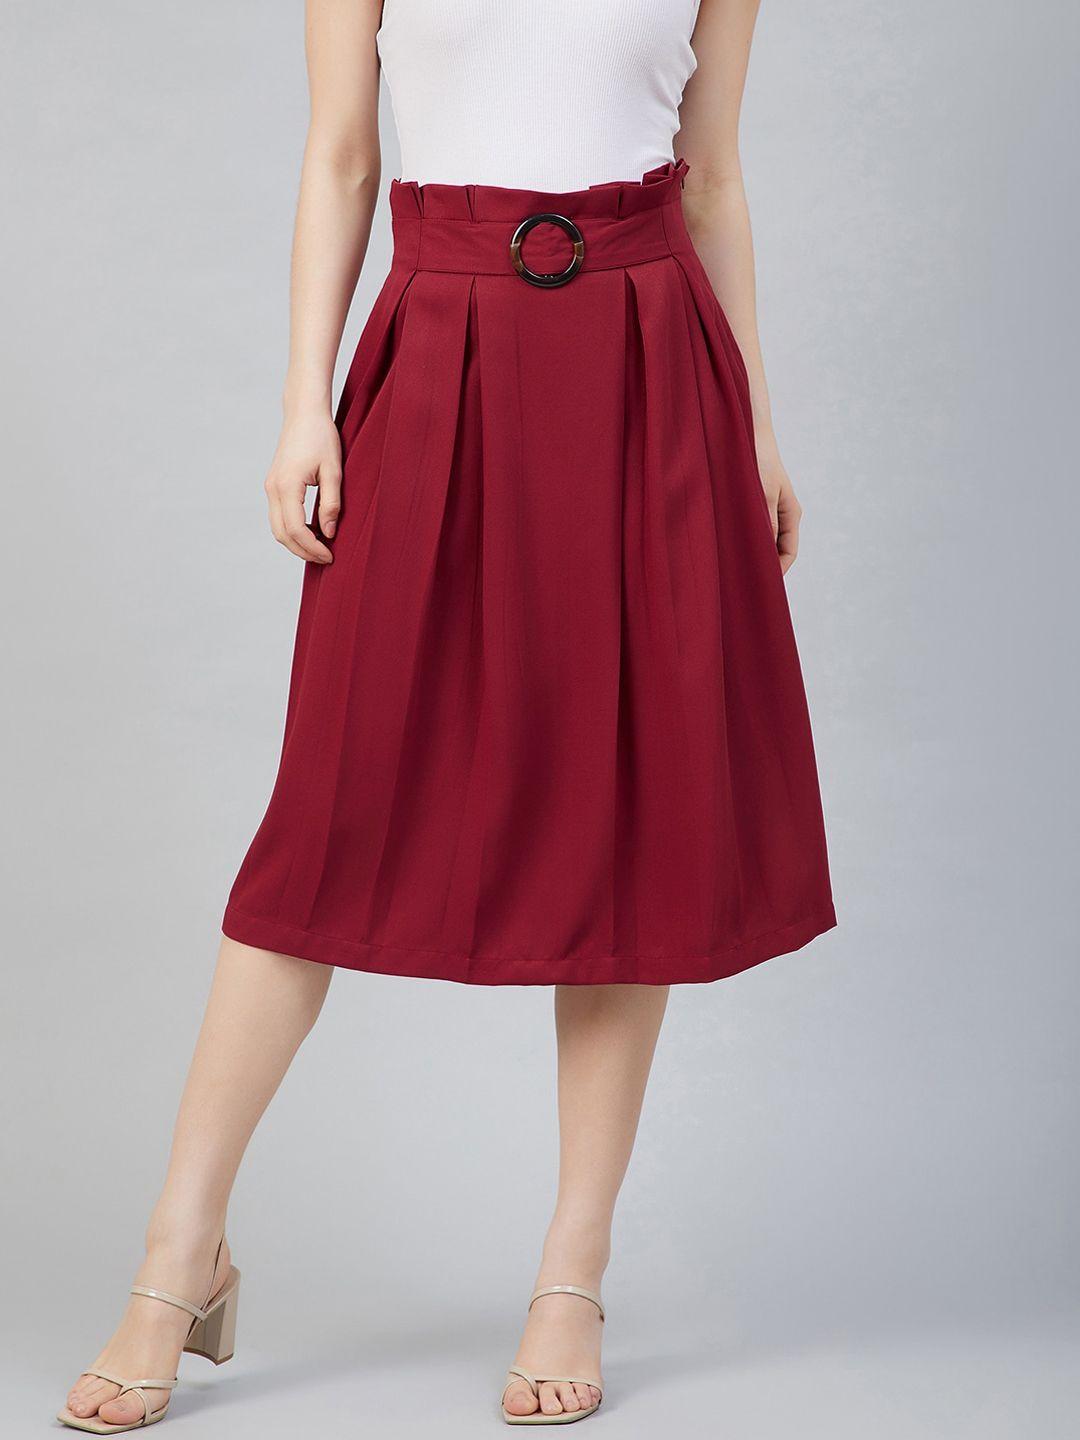 marie claire women maroon solid a-line midi skirt